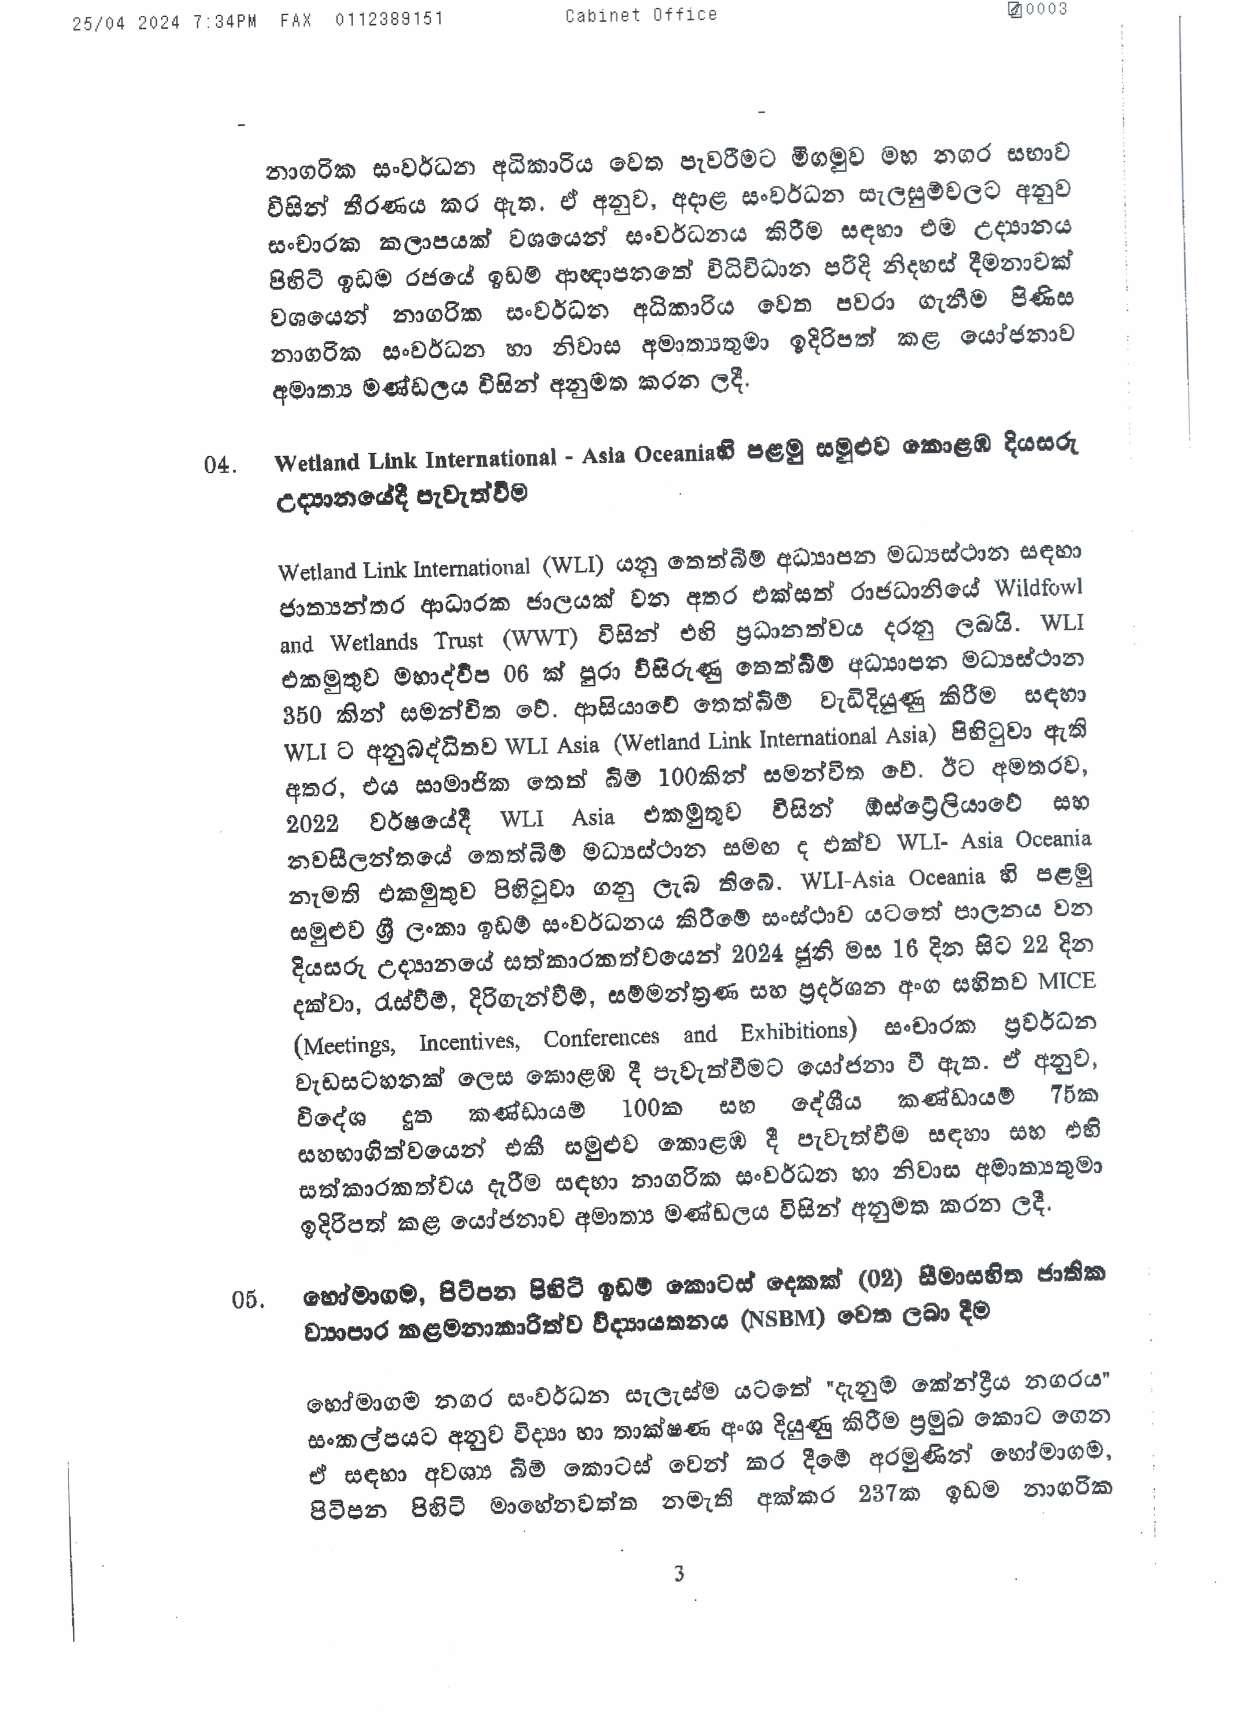 Cabinet Decision on 25.04.2024 page 003